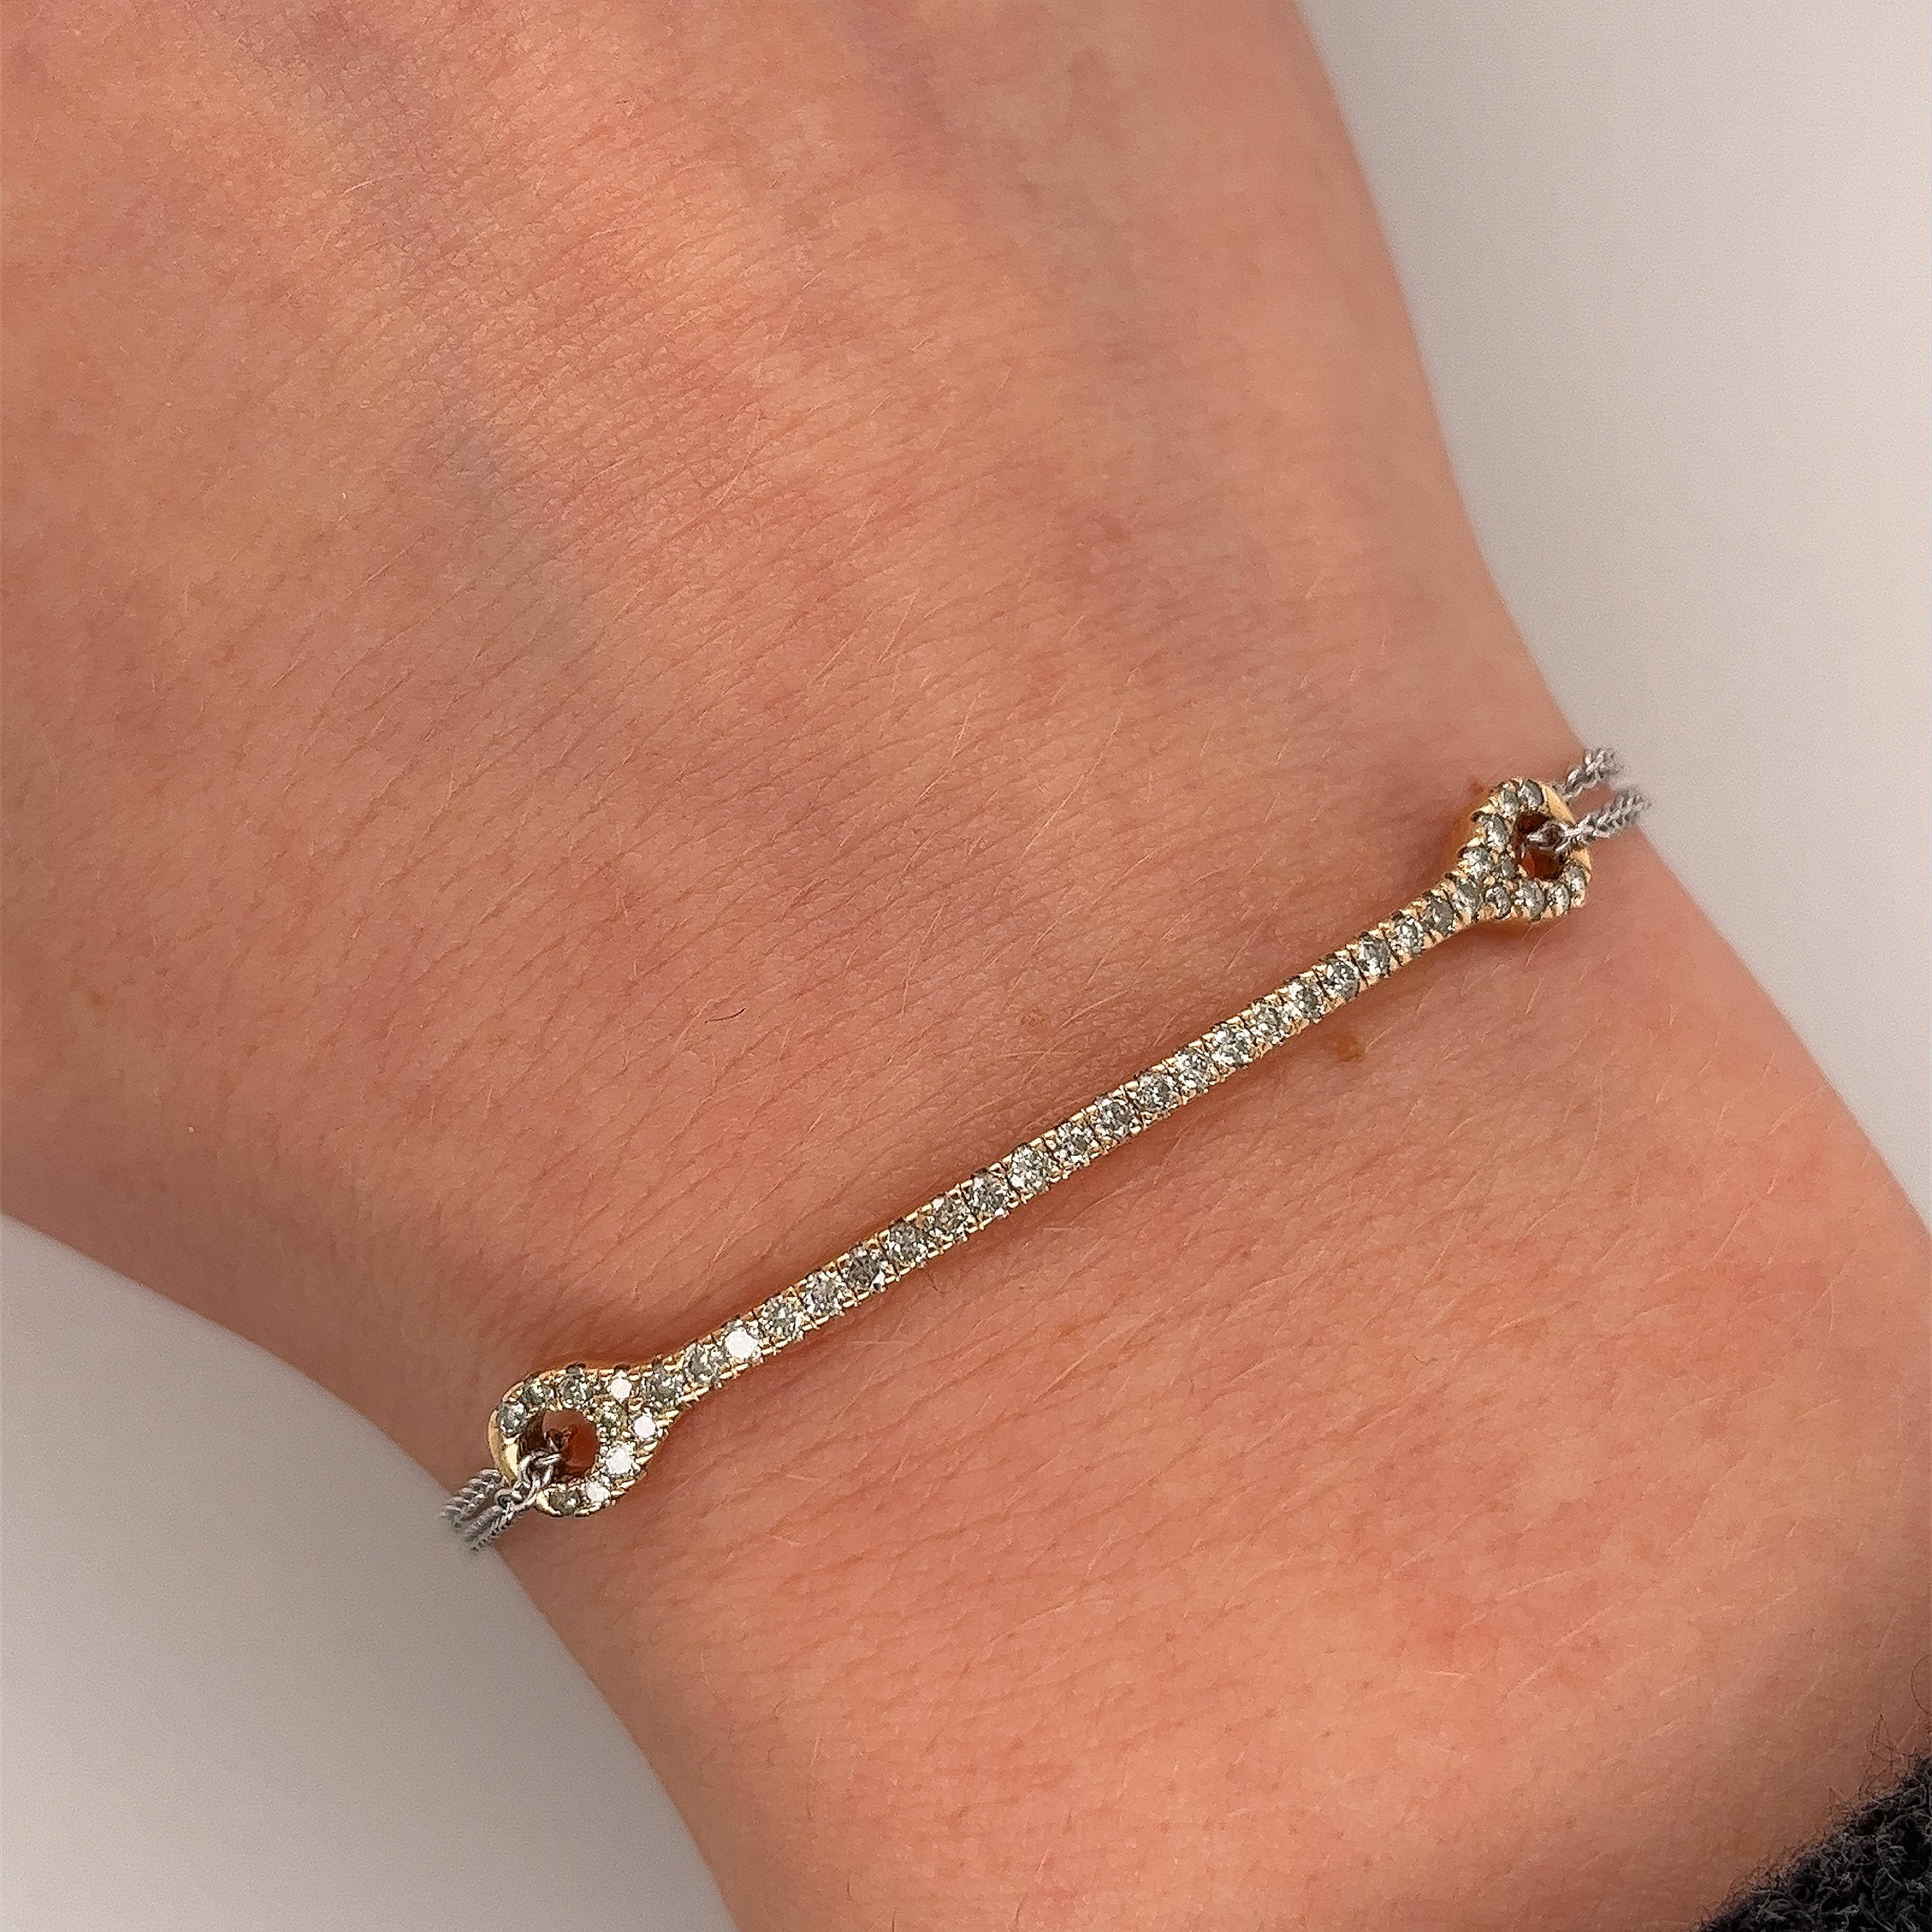 This bracelet is made of 14ct yellow gold with white gold chain 
and set with 0.54ct natural yellow diamonds, 
and has a beautiful finish. 
This design is ideal for everyday wear.

Total Diamond Weight: 0.54ct
Diamond Colour: yellow
Diamond Clarity: